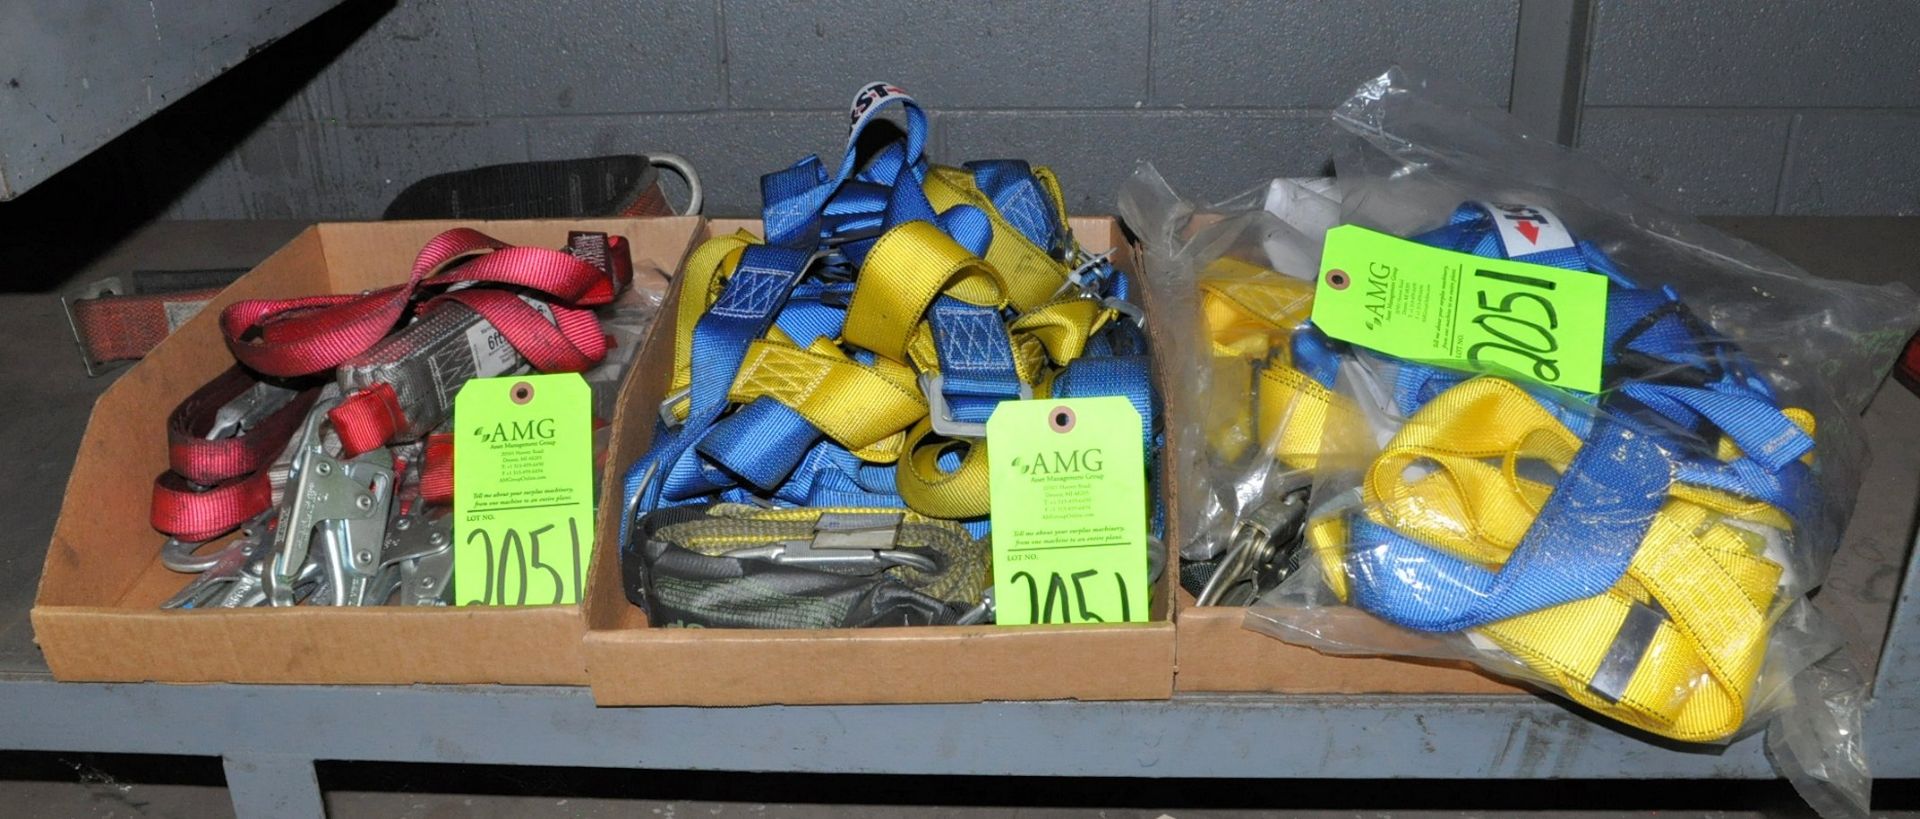 Lot-Safety Harnesses in (3) Boxes on Lower Shelf, (G-20), (Green Tag)